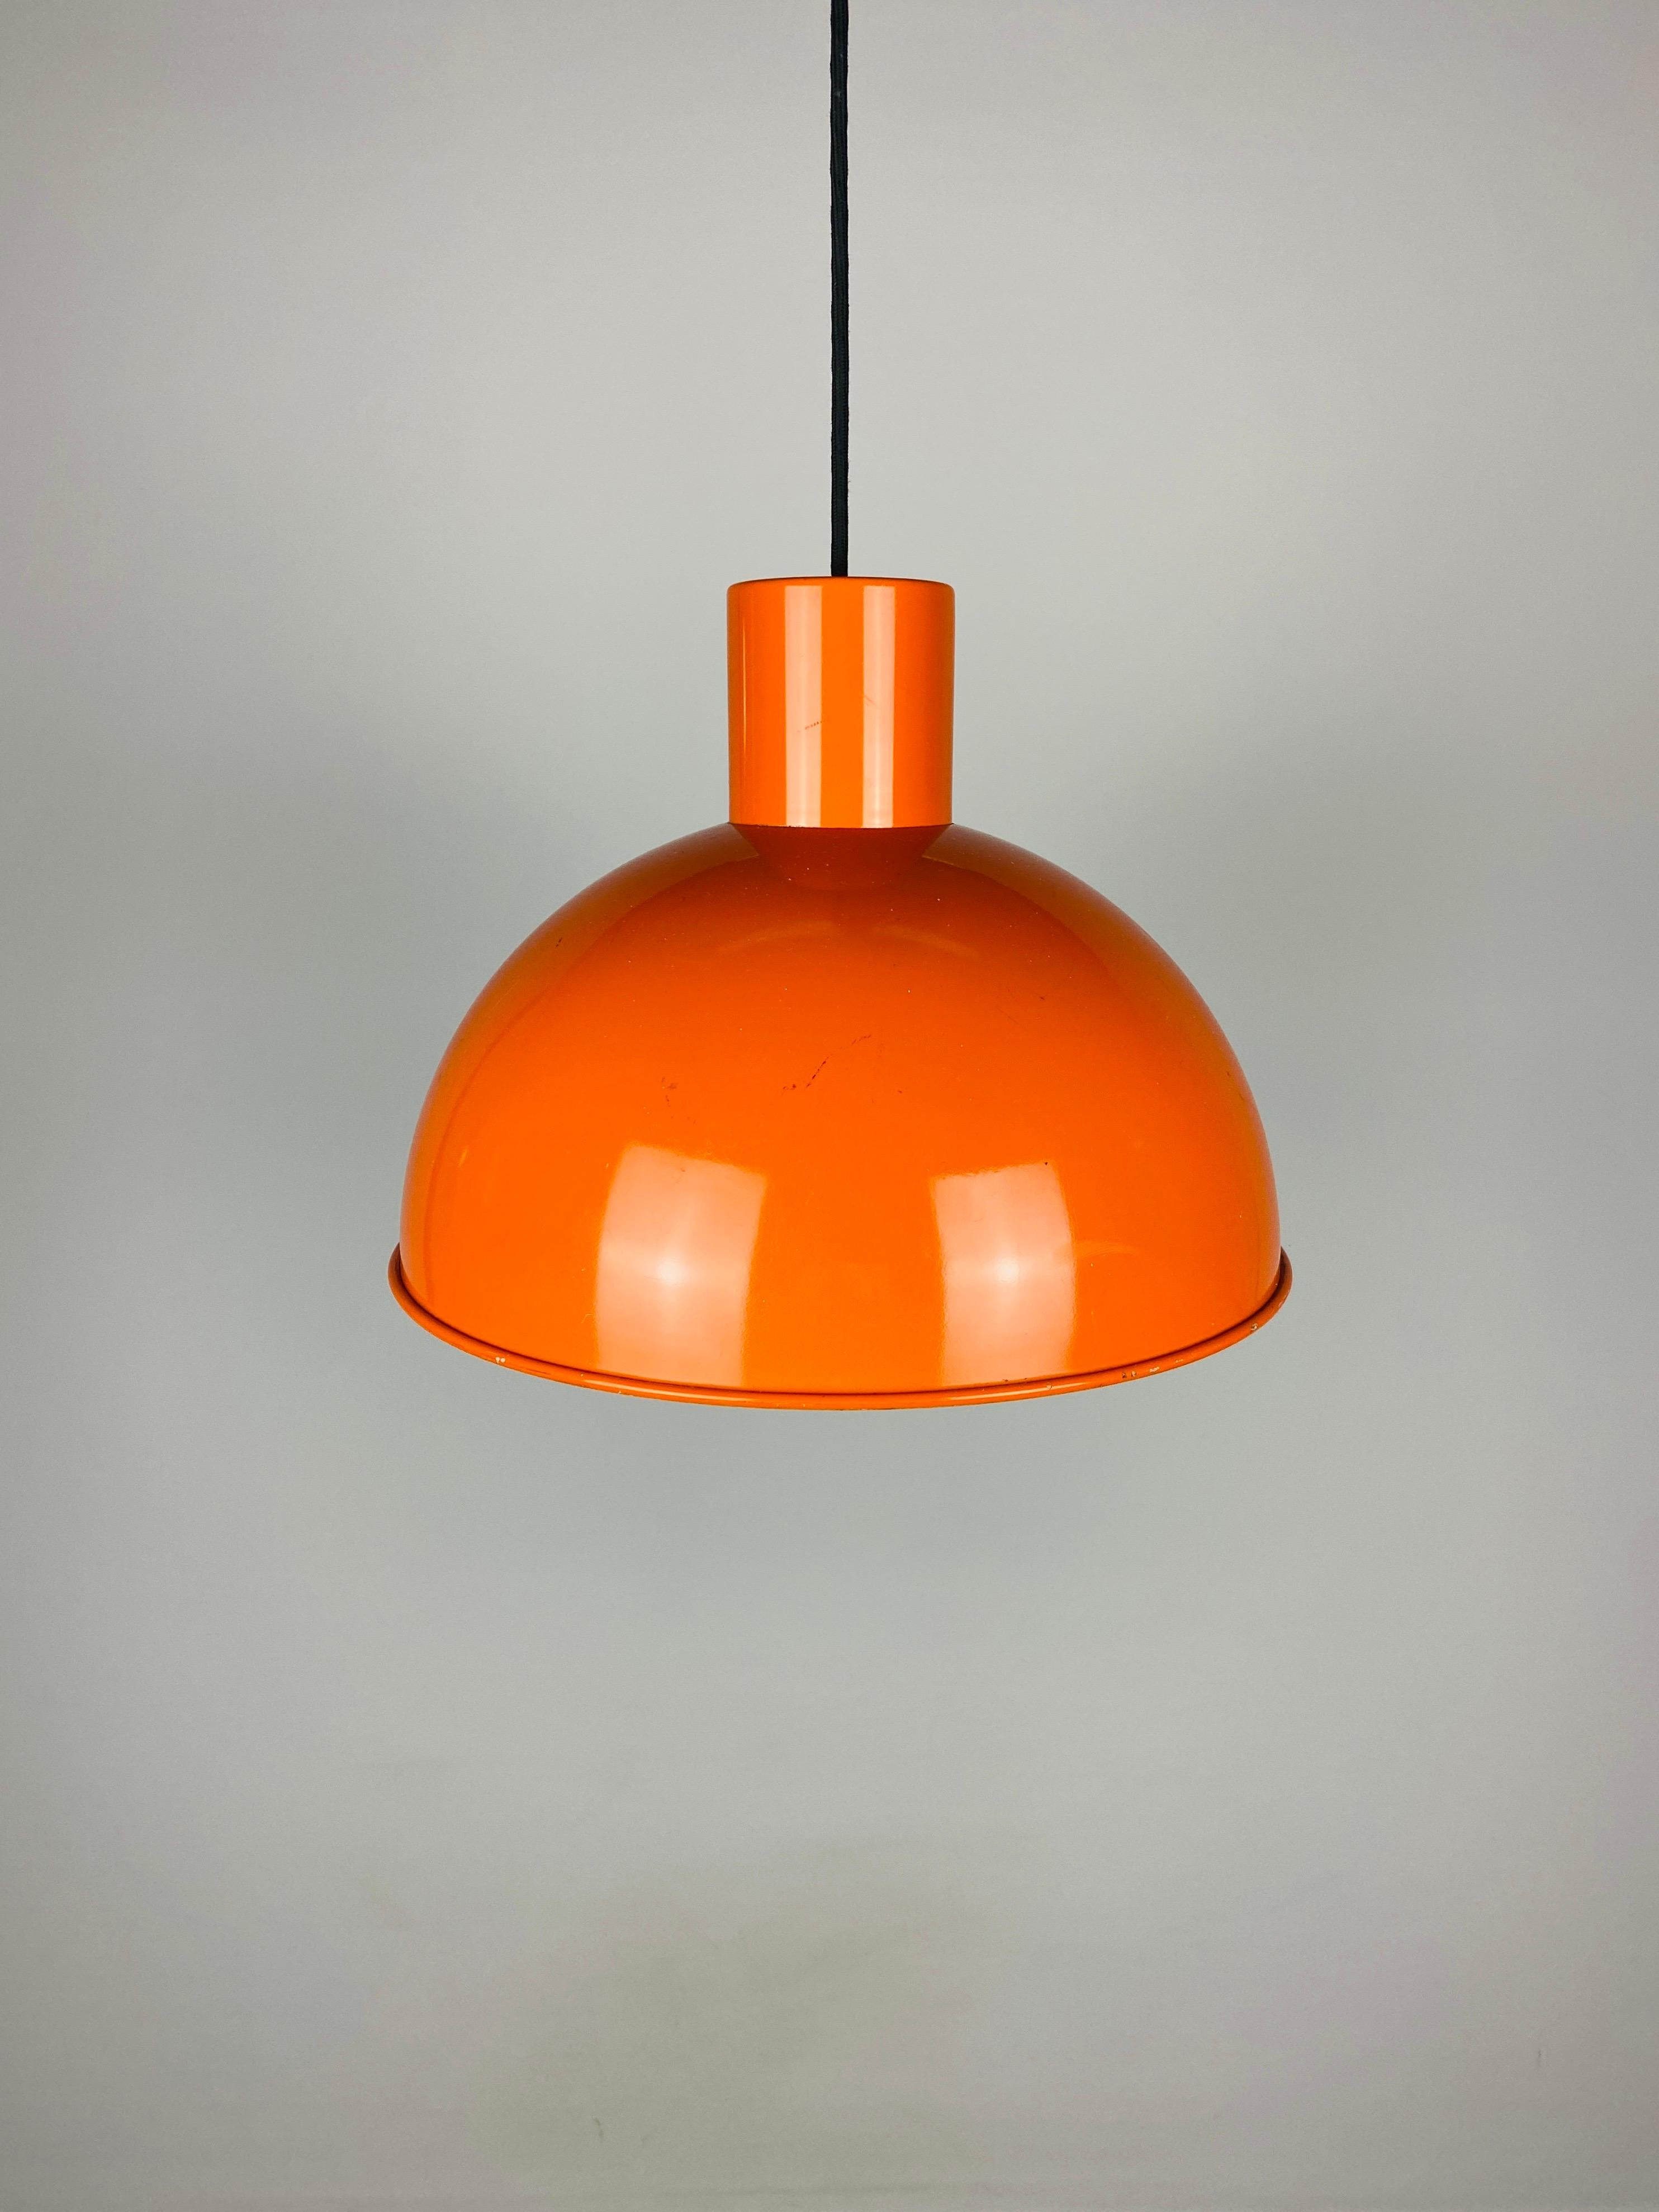 This orange hanging lamp was designed by Jo Hammerborg for Fog & Mørup in 1970. This Bunker model was made in three sizes: Mini (small), Midi (Medium) and Maxi (large). This is the medium version. Made of thick coated metal. The inside is white